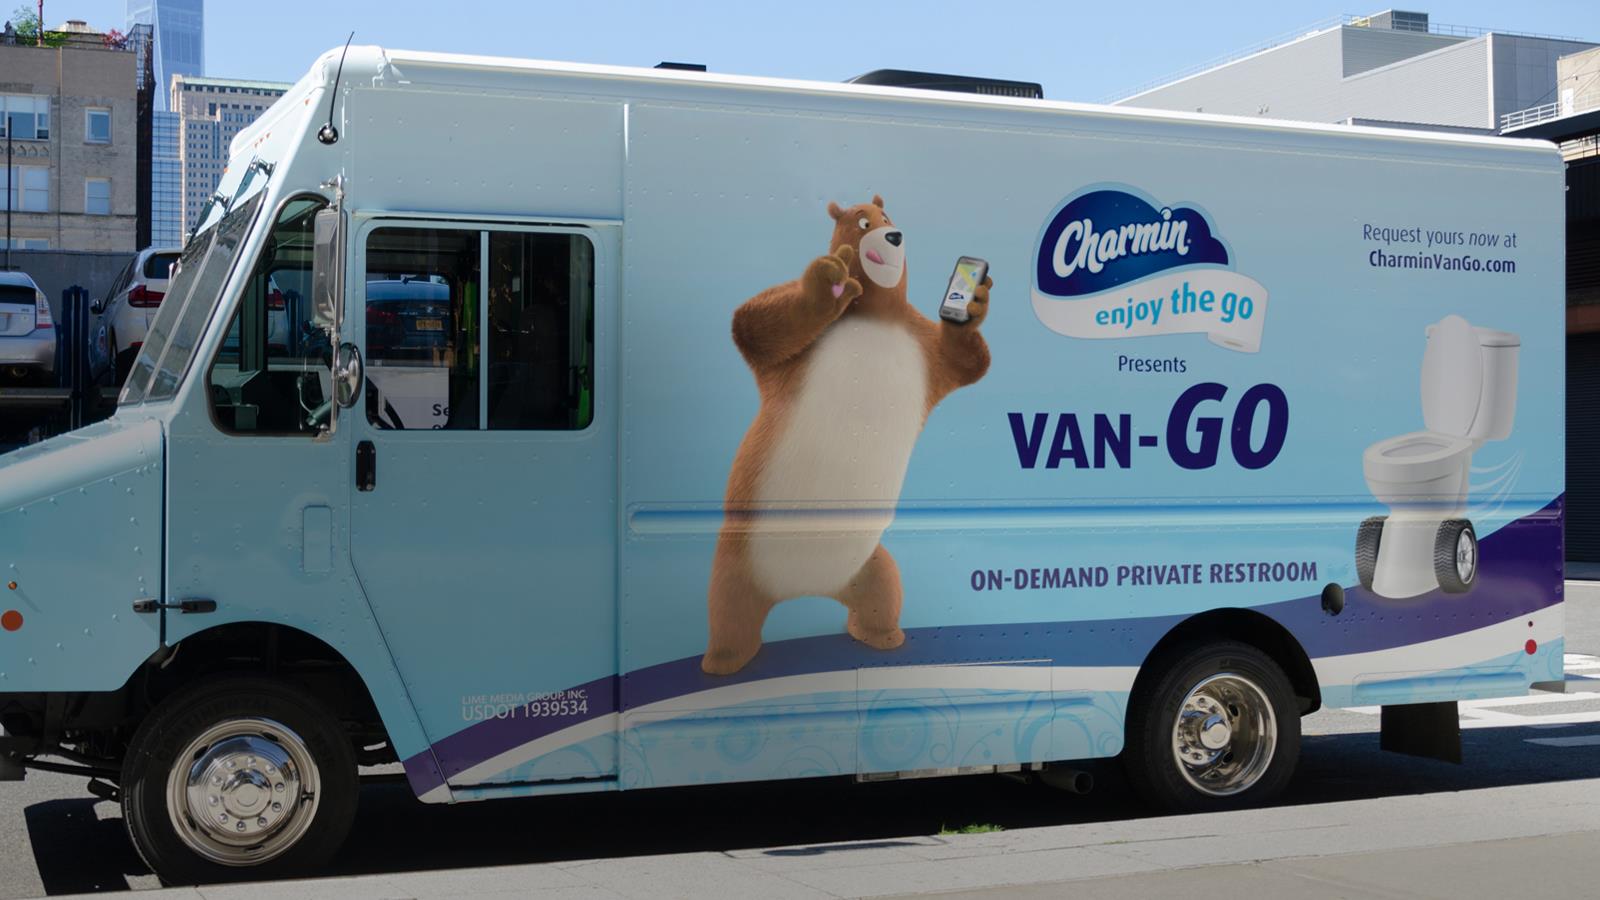 Introducing the first-ever on-demand mobile bathrooms with Charmin